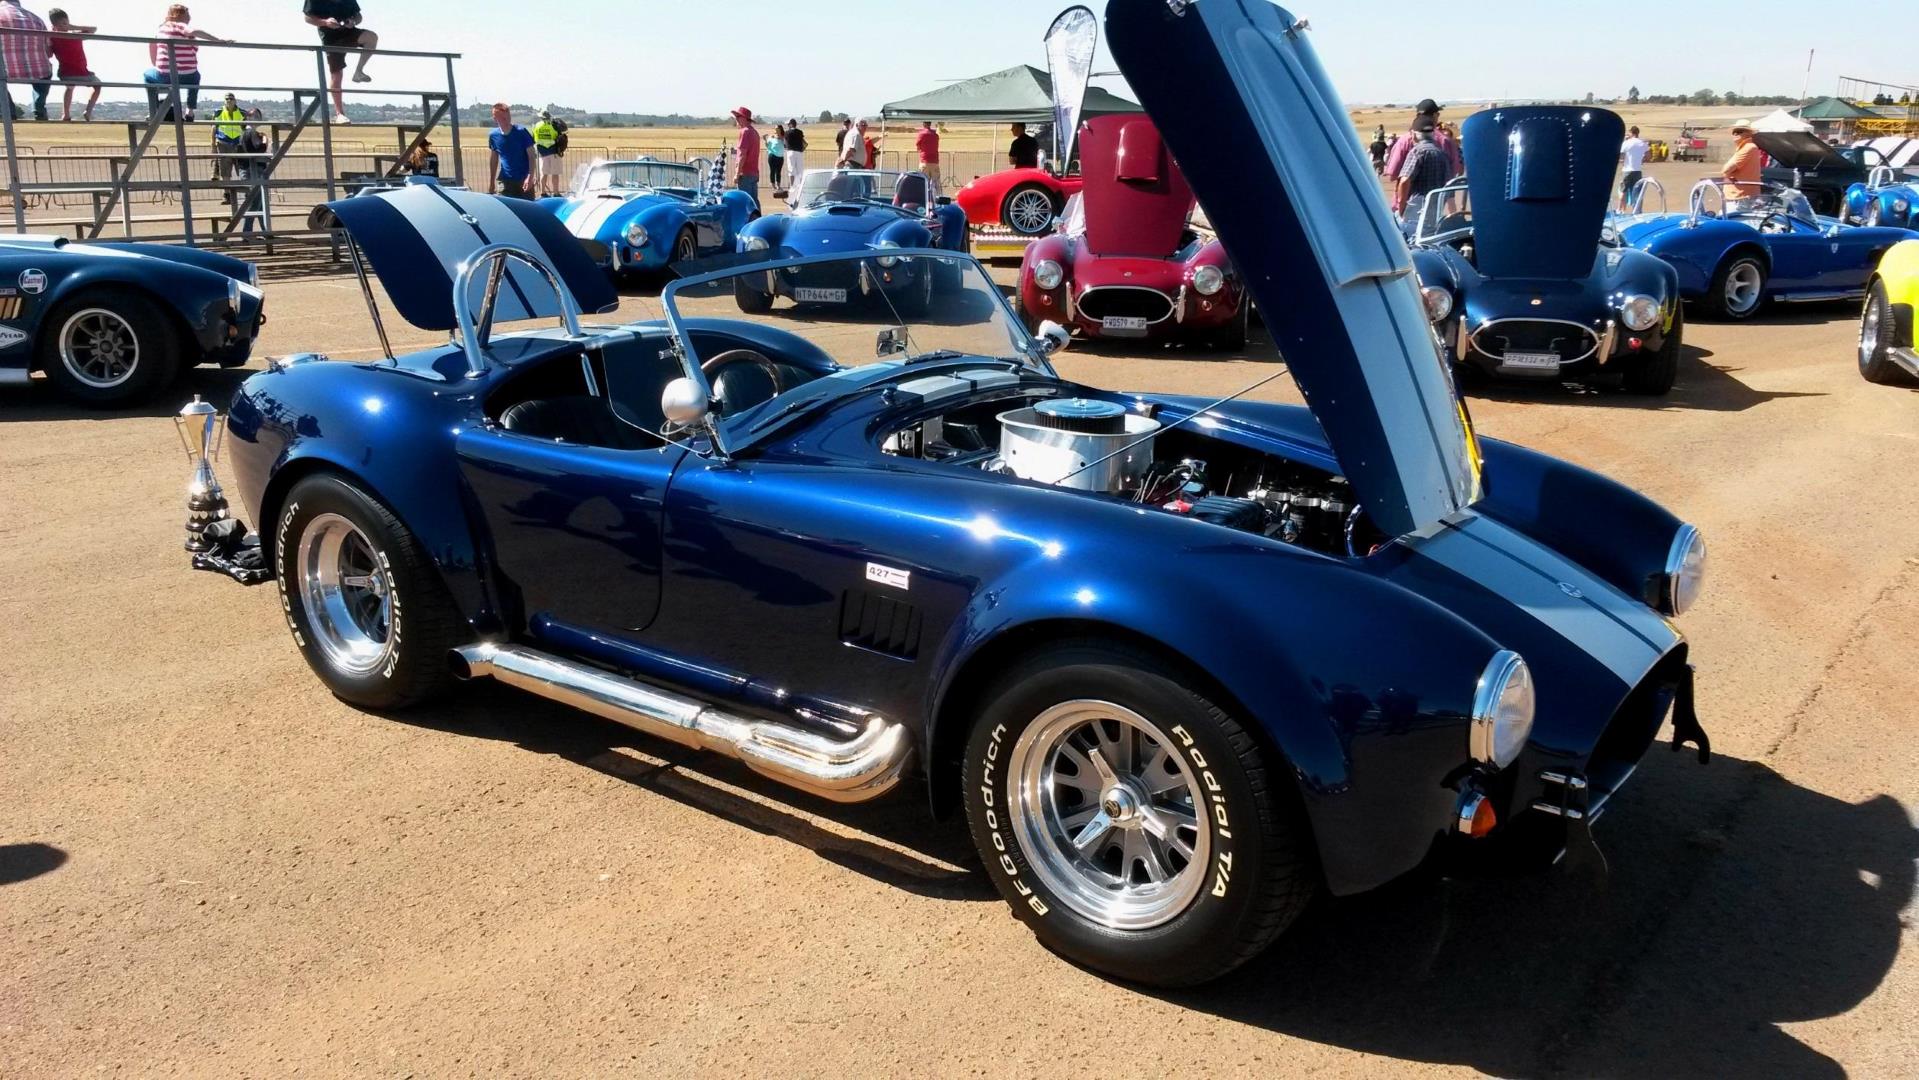 The Day a Cobra went completely unnoticed - Expert AC Cobra Car Reviews